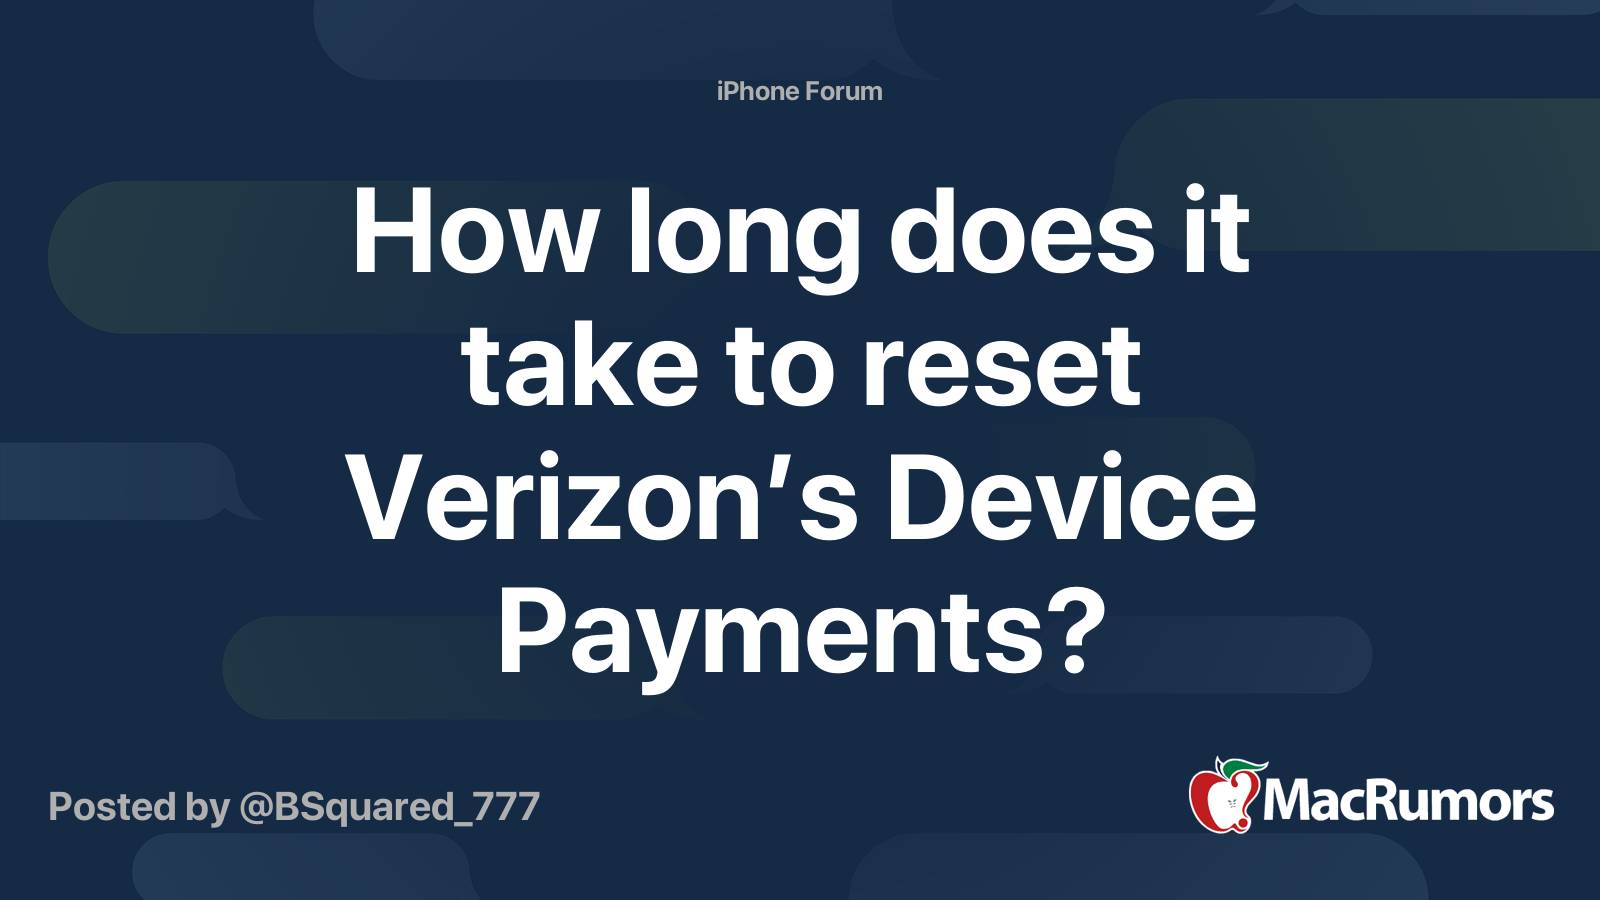 How long does it take to reset Verizon's Device Payments?